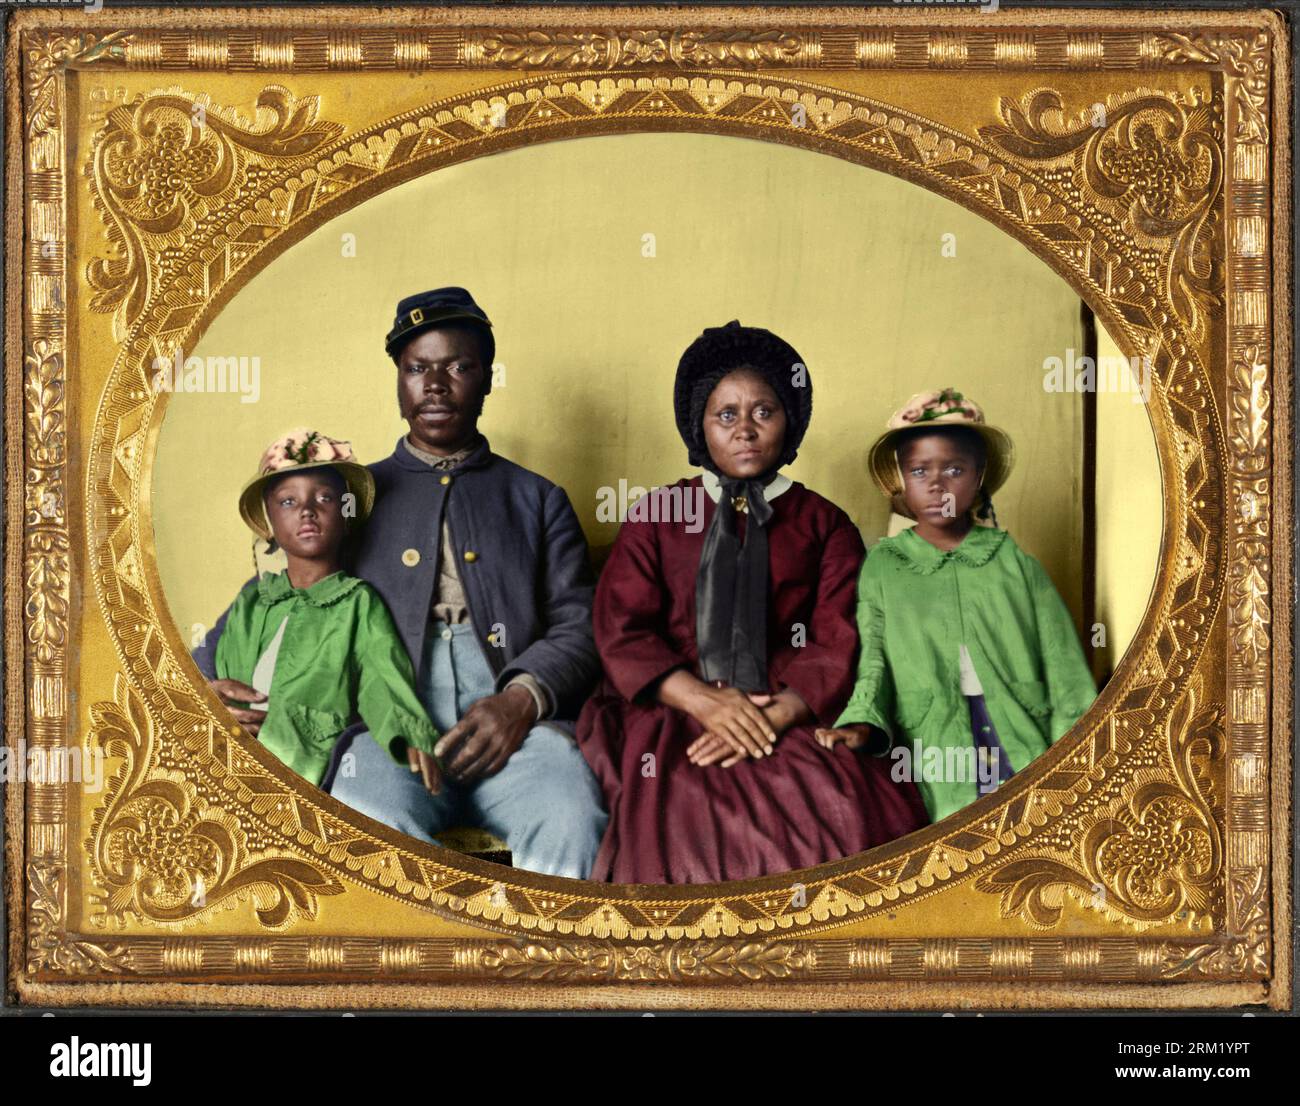 Sgt. Samuel Smith, African American soldier of the 119th USCT, in Union uniform with his wife Mollie, and his daughters Mary and Maggie. Between 1863 Stock Photo